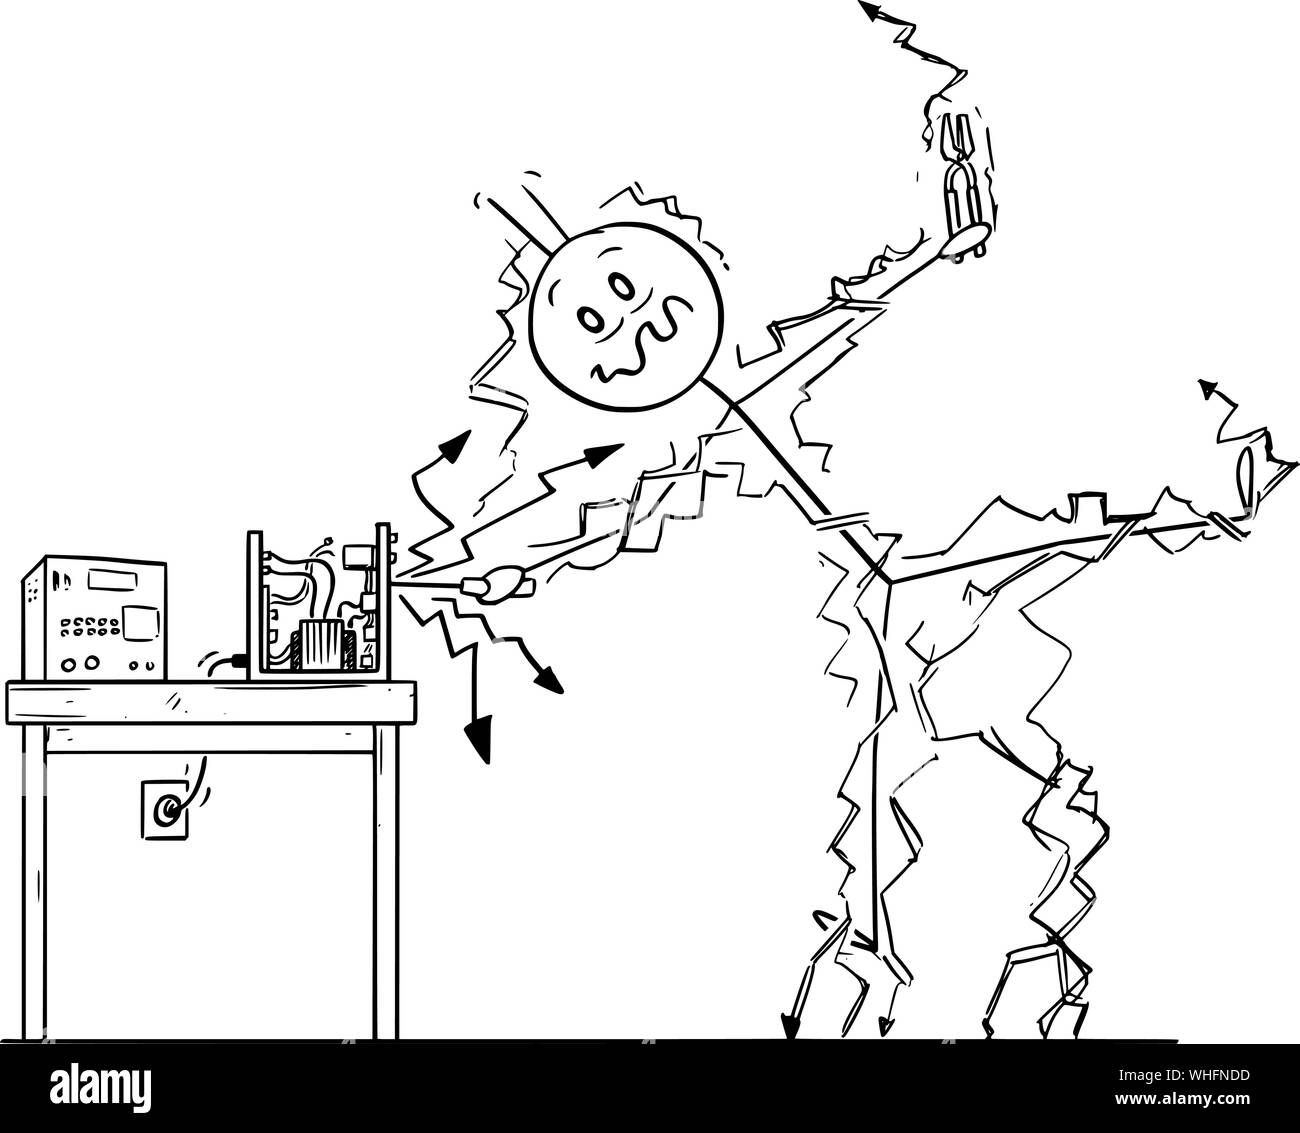 Vector cartoon stick figure drawing conceptual illustration of man or repairman repairing some electronic device and get electric shock. Occupational safety concept. Stock Vector